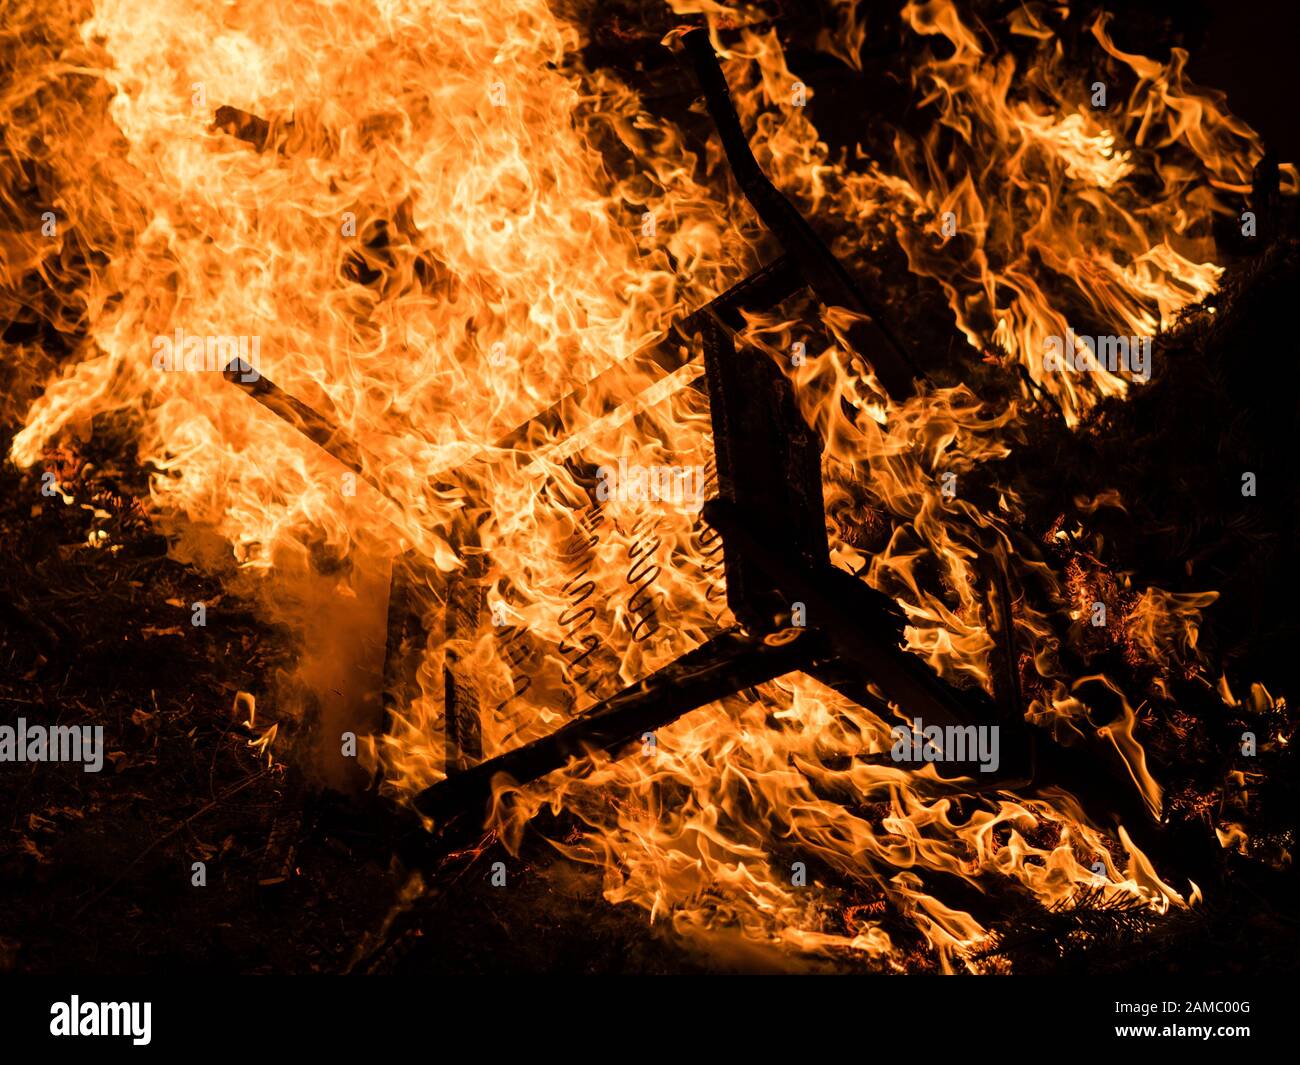 Overturned chair engulfed in flames Stock Photo